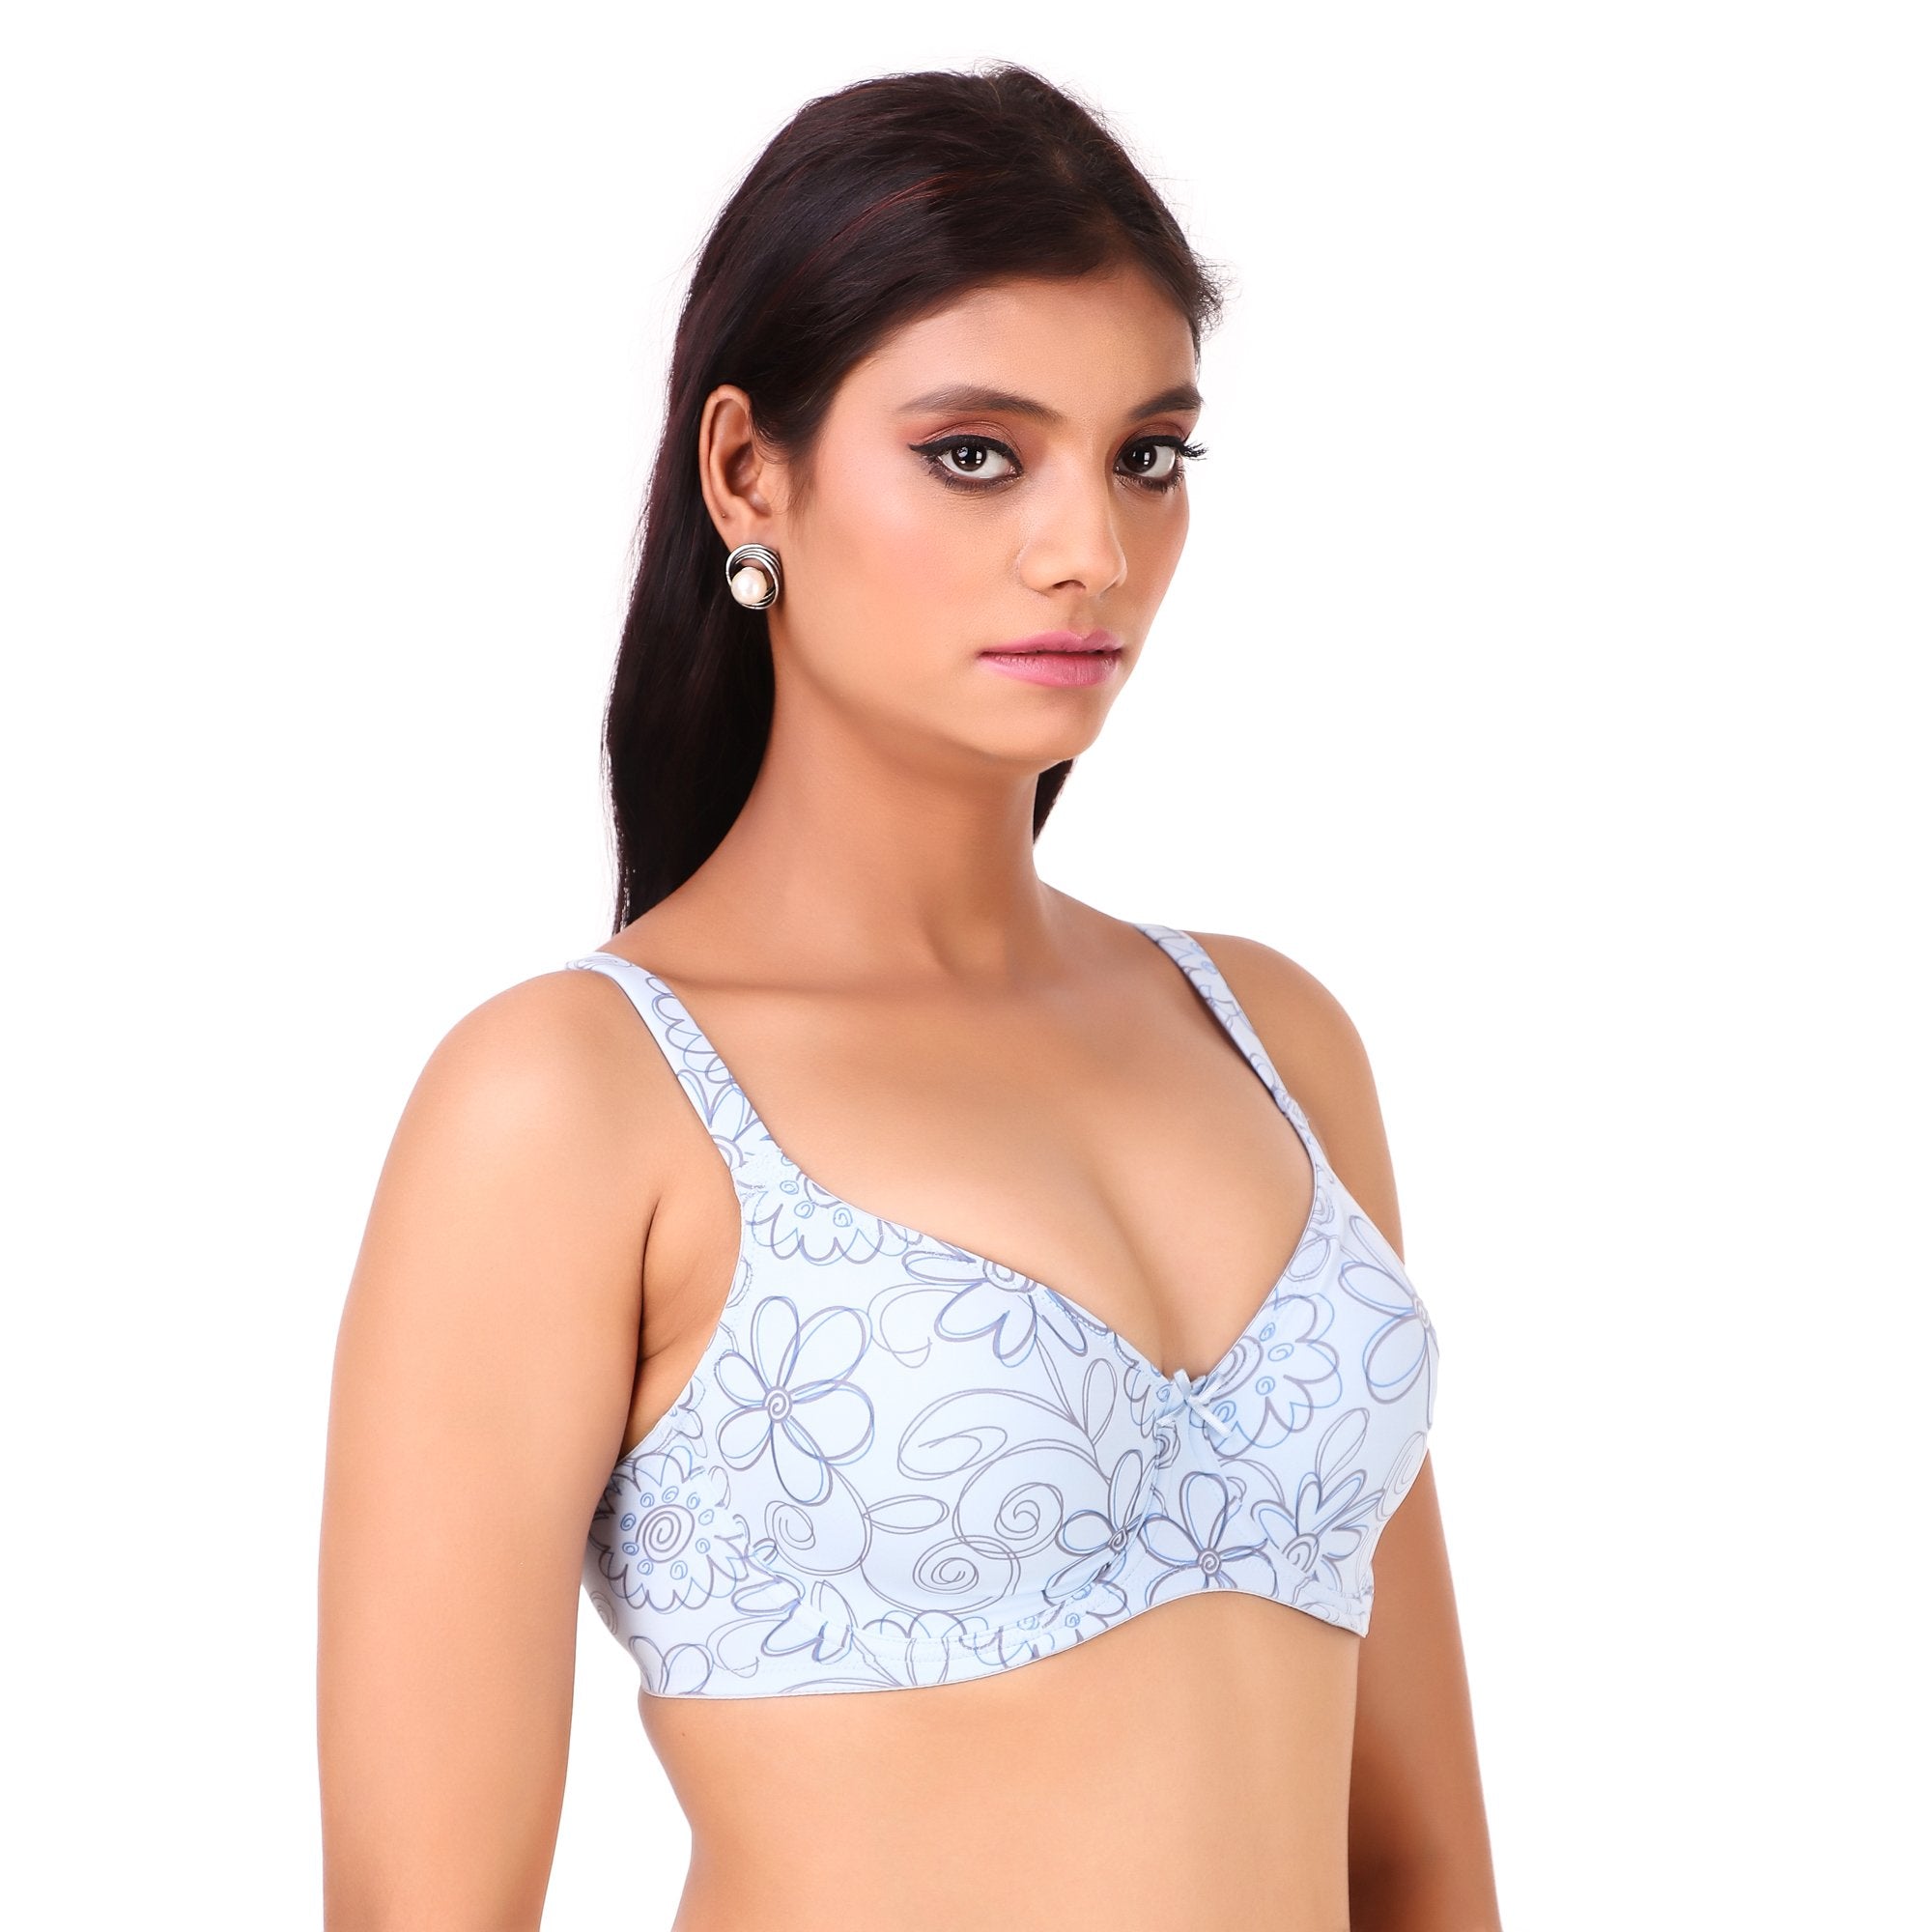 TRIUMPH-151I201 MINIMIZER 75 Support Wired Non Padded Comfortable High Support Big-Cup Bra